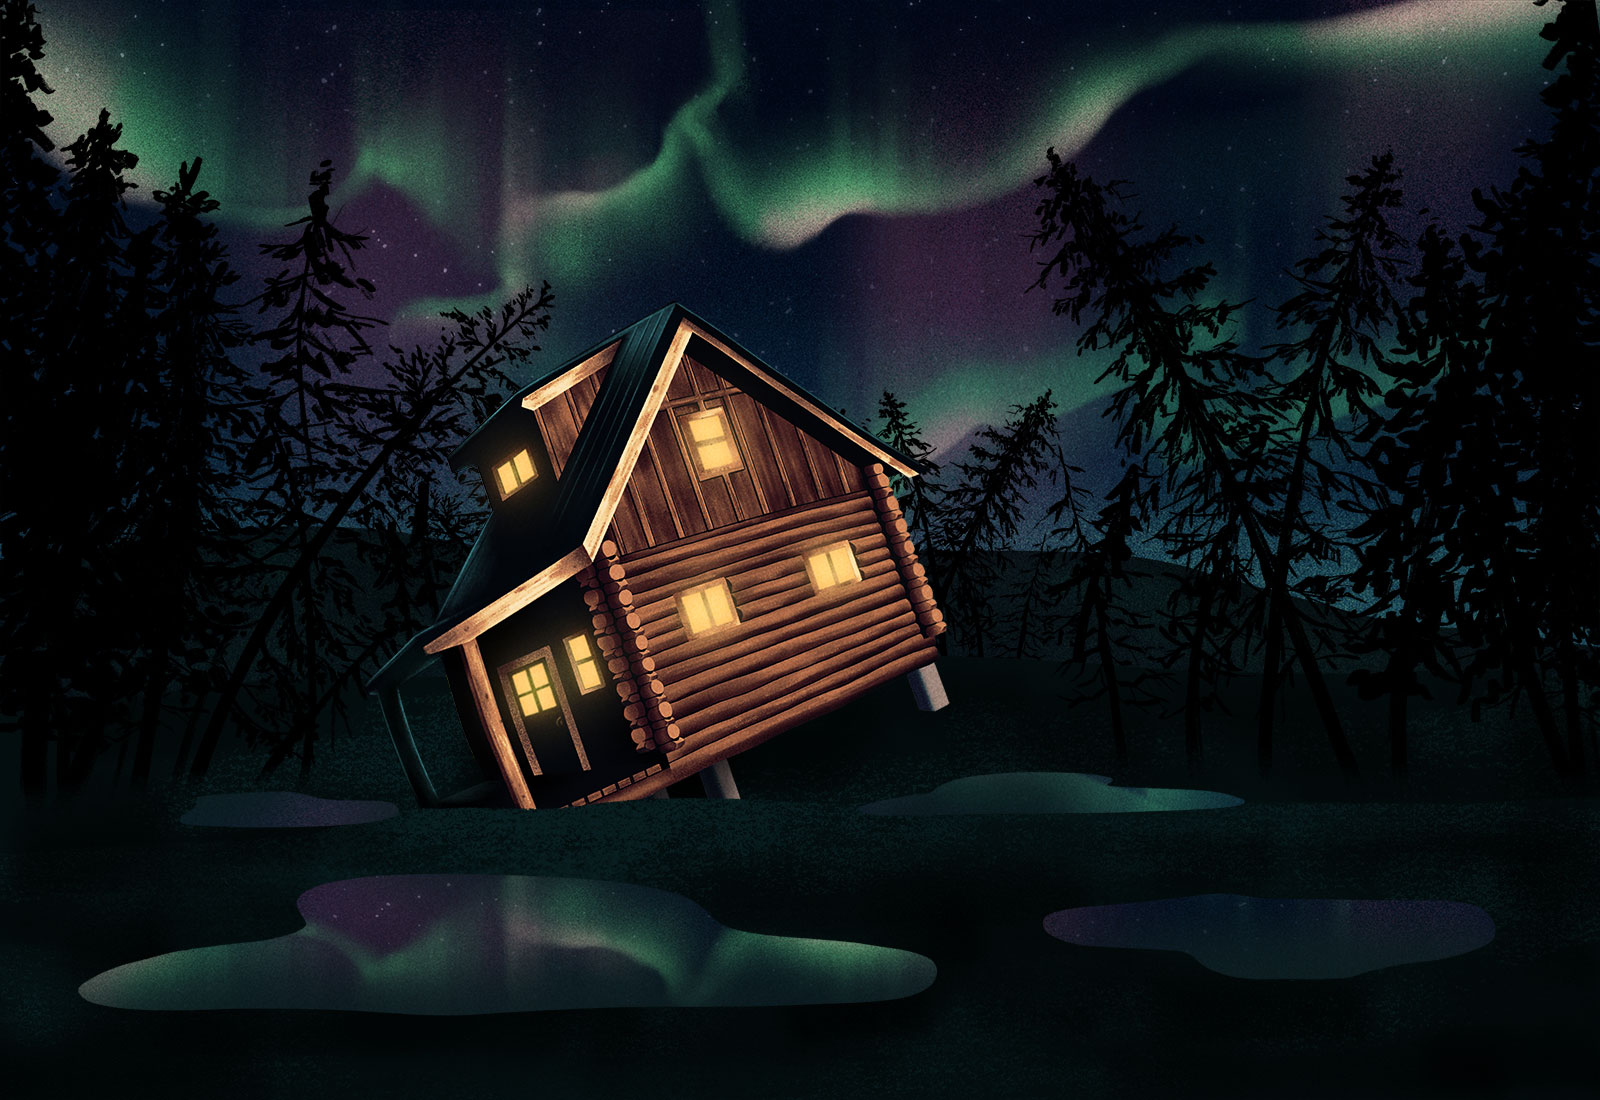 illustration of a log cabin tilting left and sinking into ground, silhouetted pine trees on each side of the cabin, with the Northern Lights in a dark sky and puddles on ground reflecting the sky